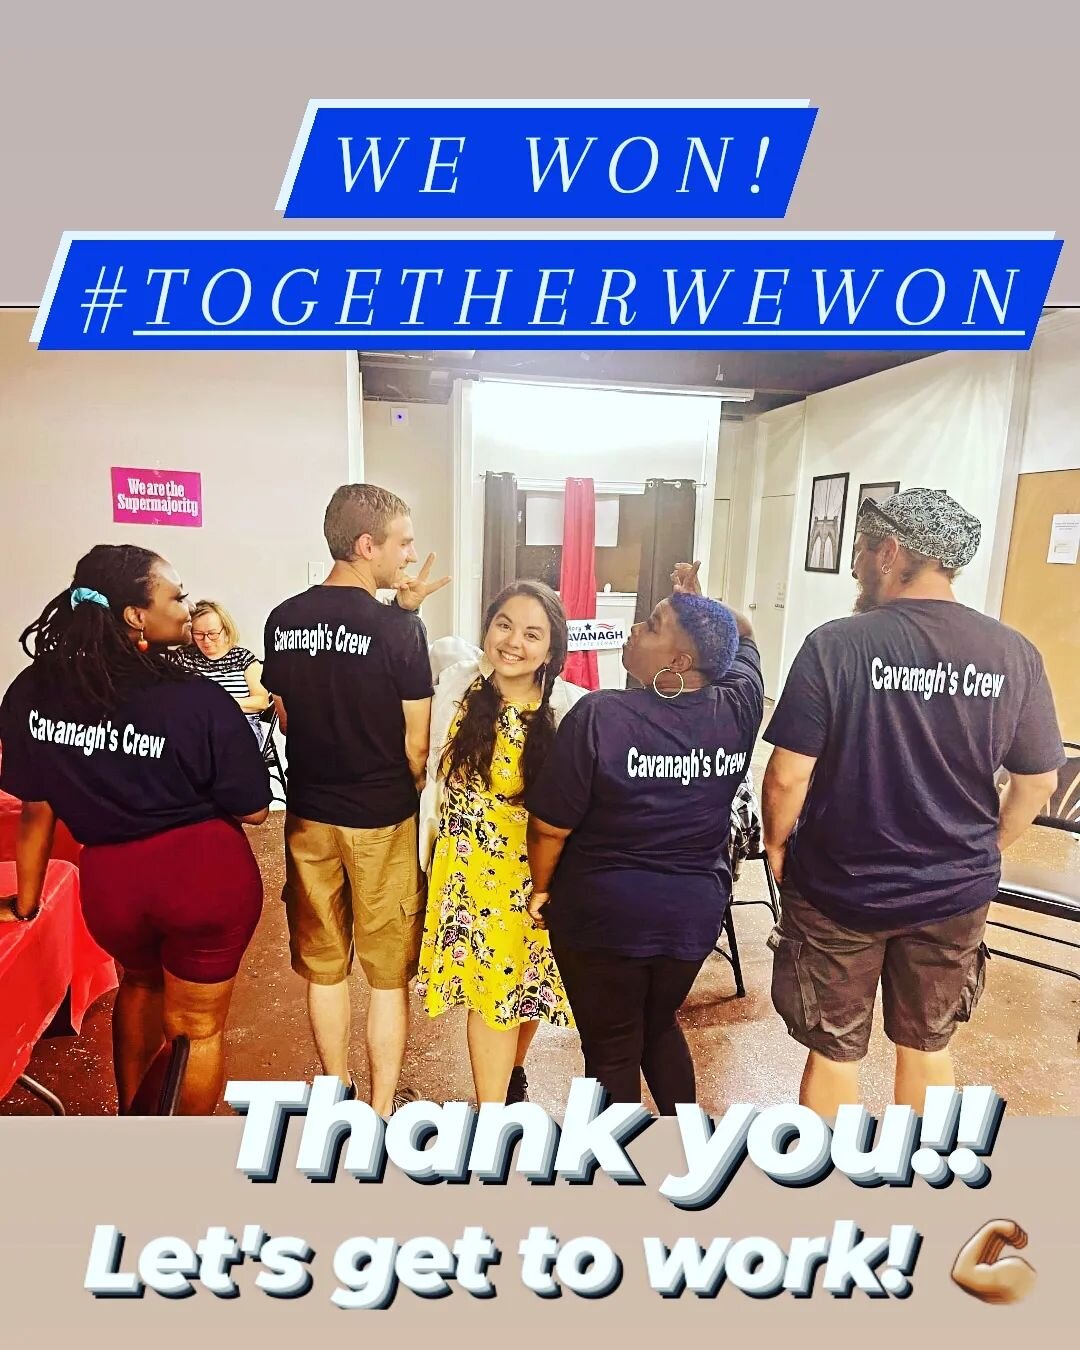 WE WON!! 

Thank you everyone- friends, supporters, volunteers, voters, &amp; everyone in between! I have spent this entire campaign getting to know new communities, families, &amp; what makes this New 6th State Senate District so unique! Now is the 